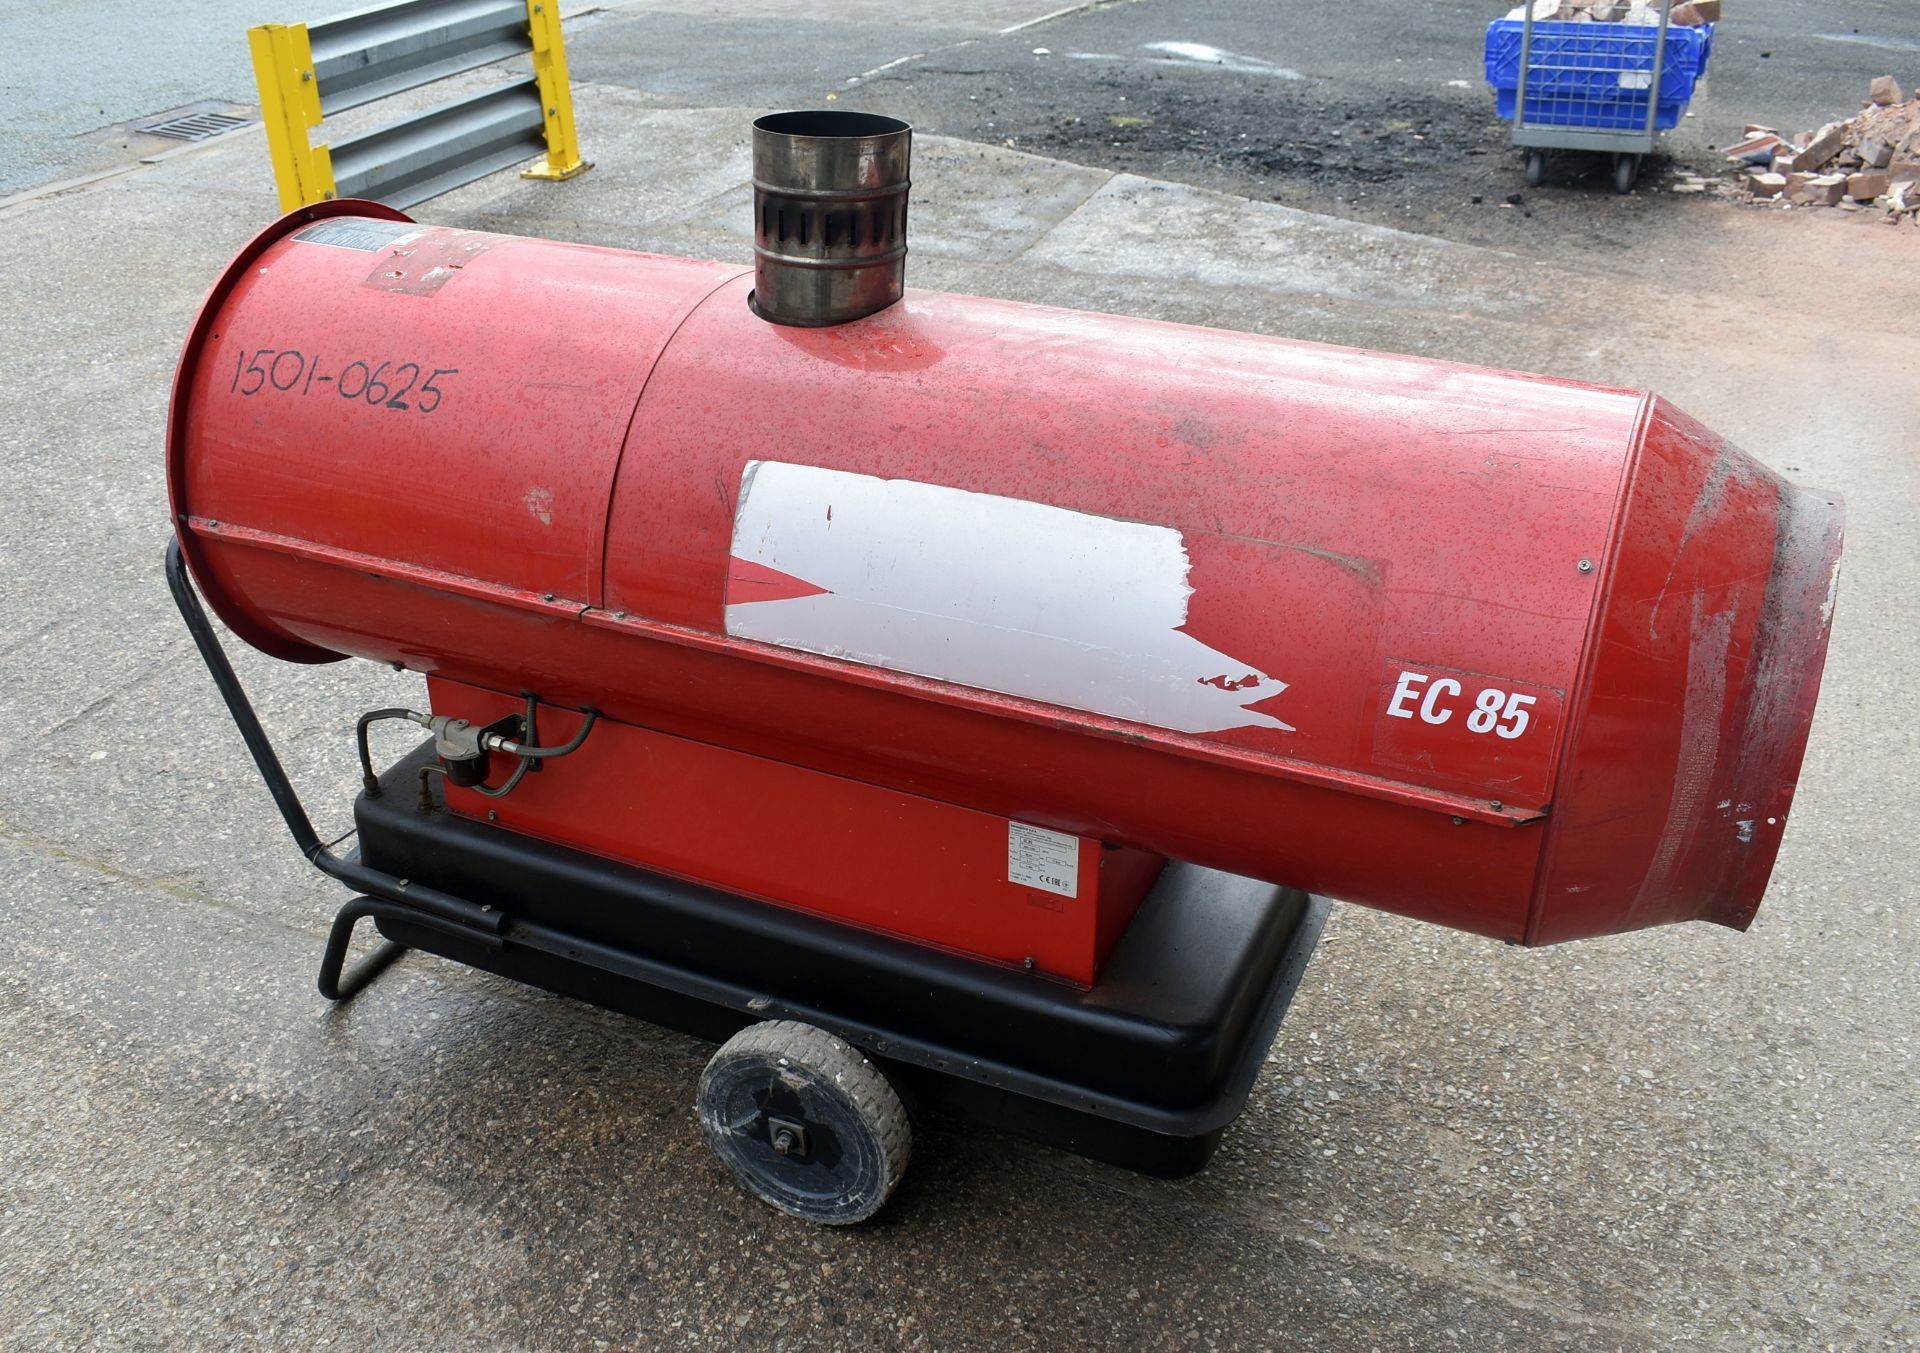 1 x Arcotherm EC85 Indirect Oil Fired Space Heater - Image 8 of 13